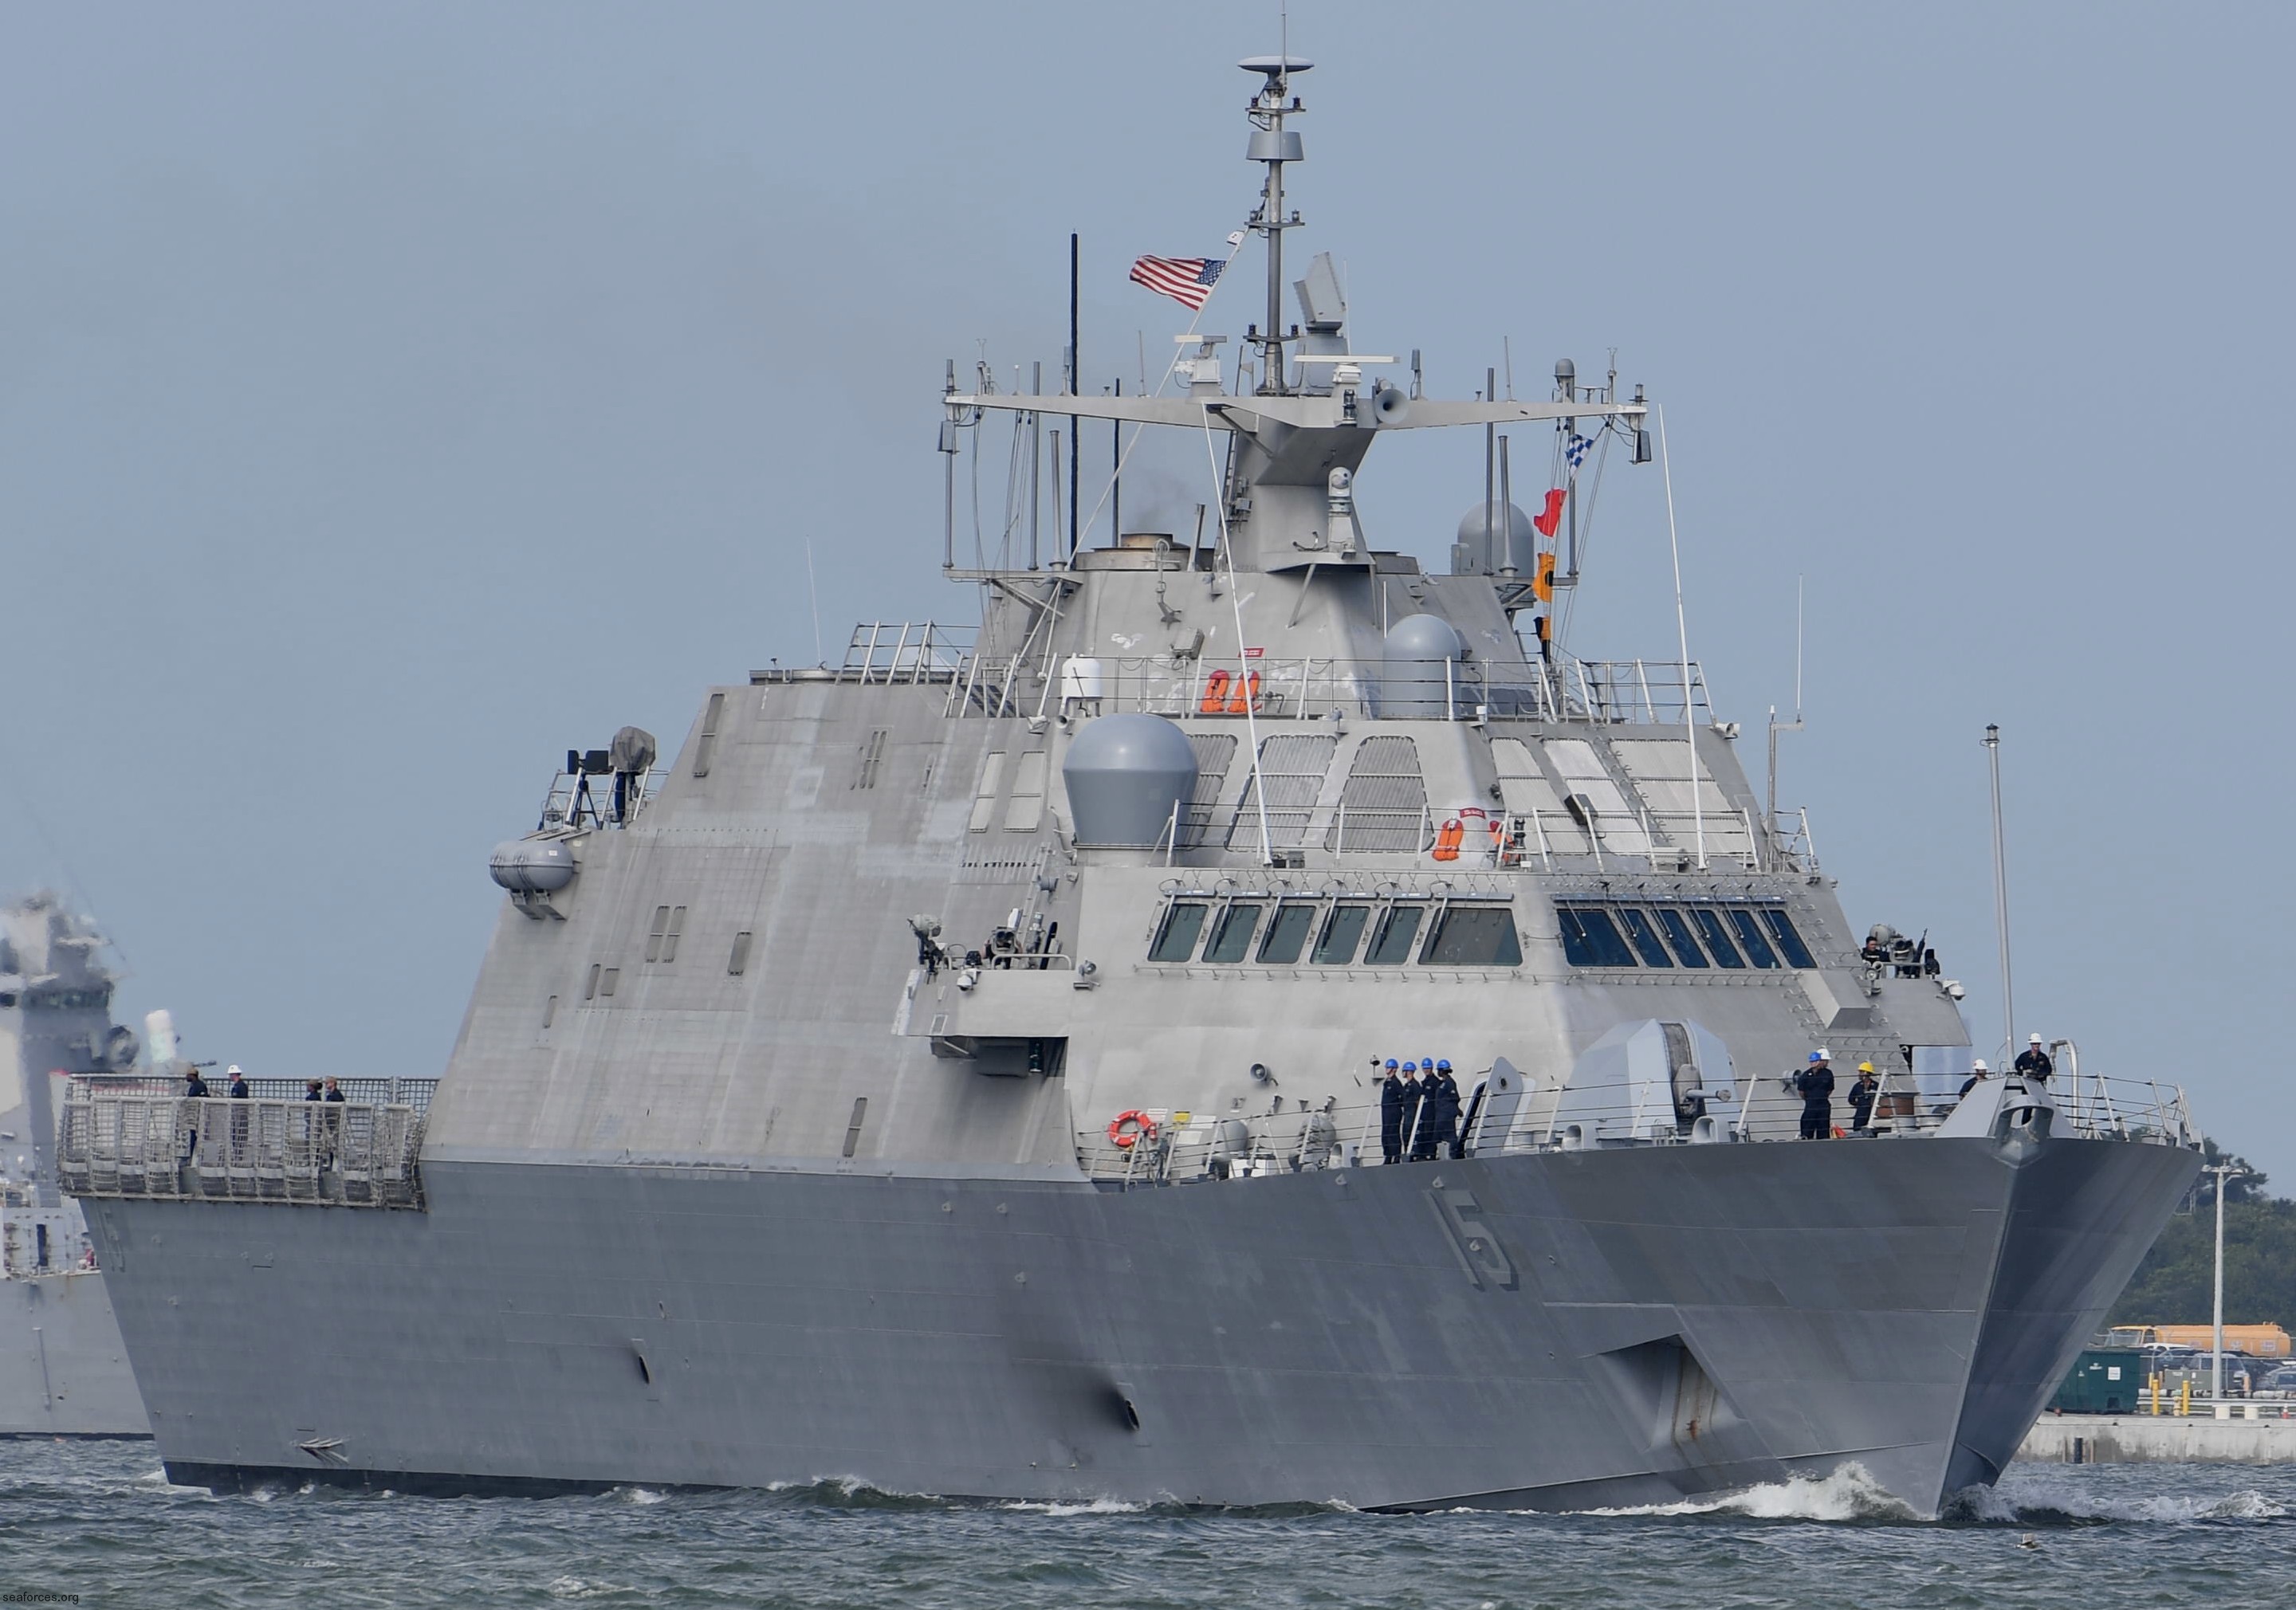 lcs-15 uss billings freedom class littoral combat ship us navy20 naval station mayport florida homeport